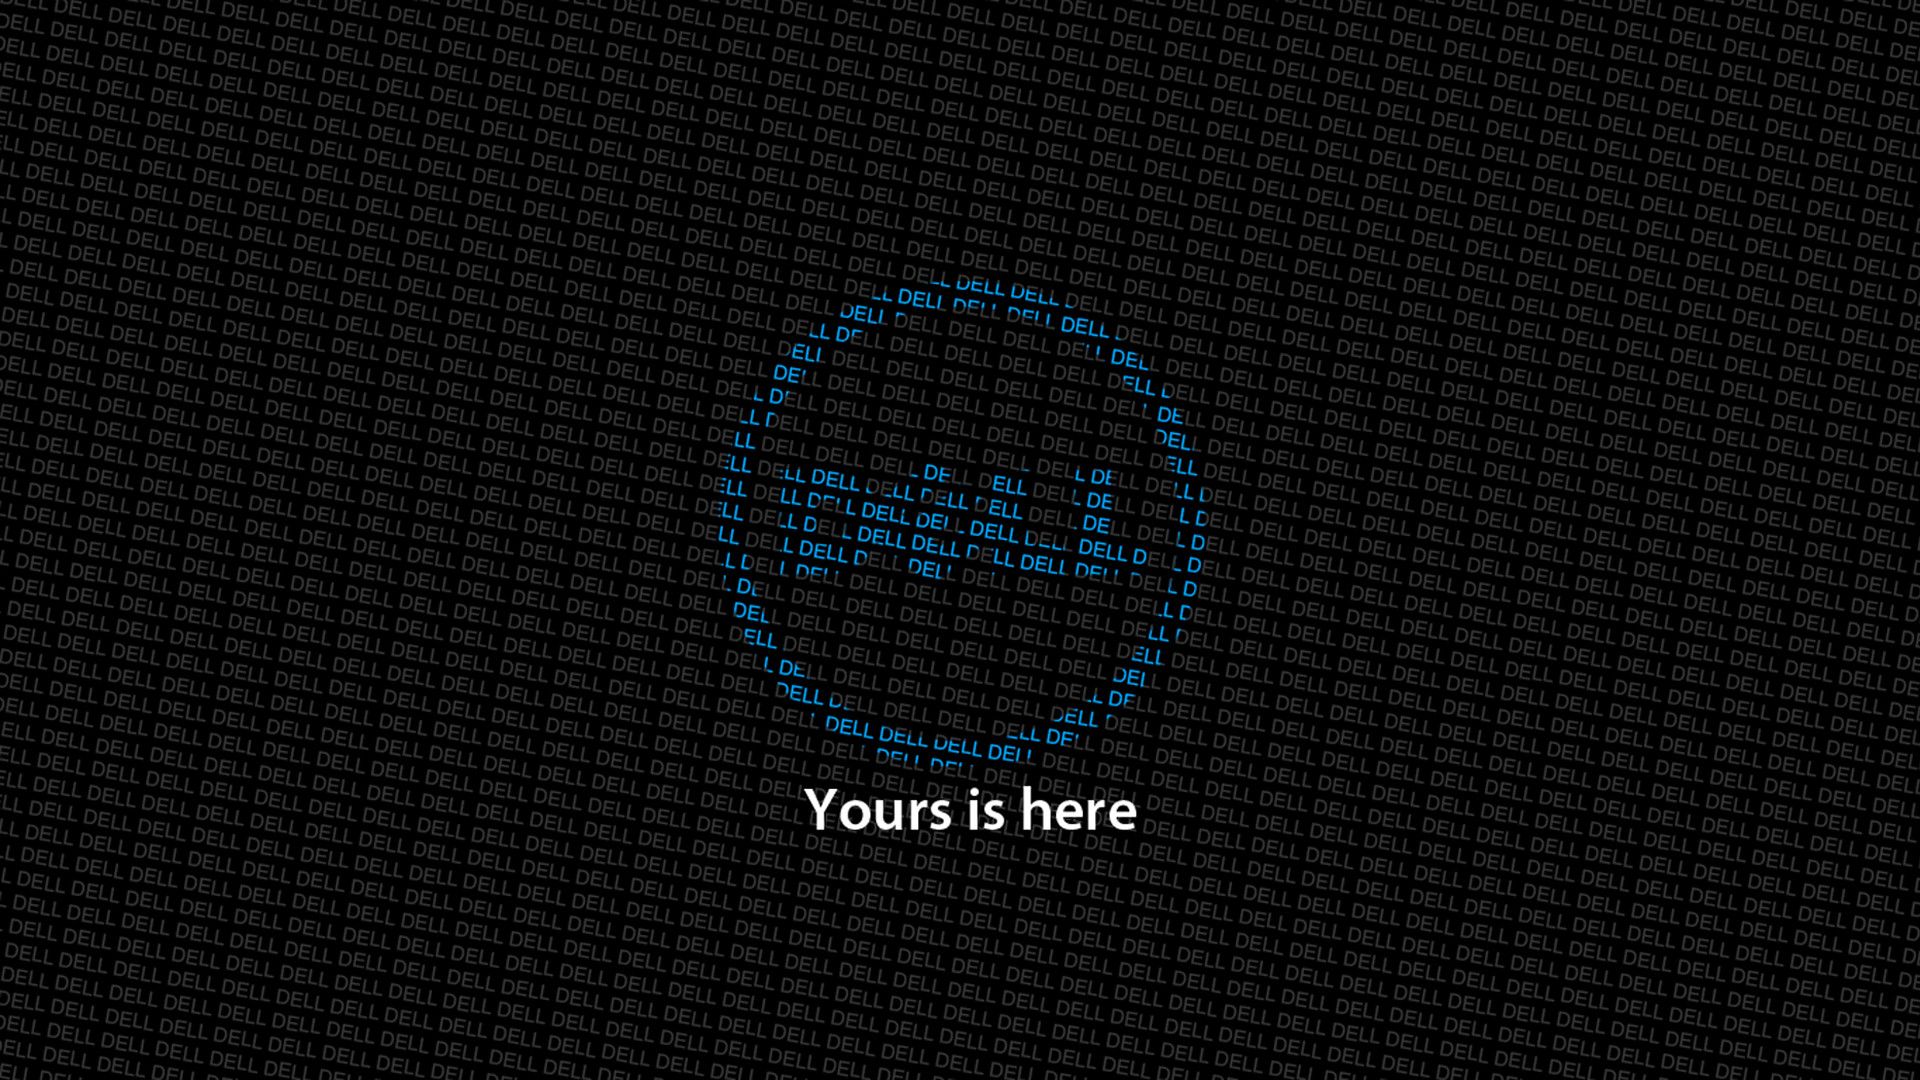 Dell Inspiron Wallpapers - Wallpaper Cave